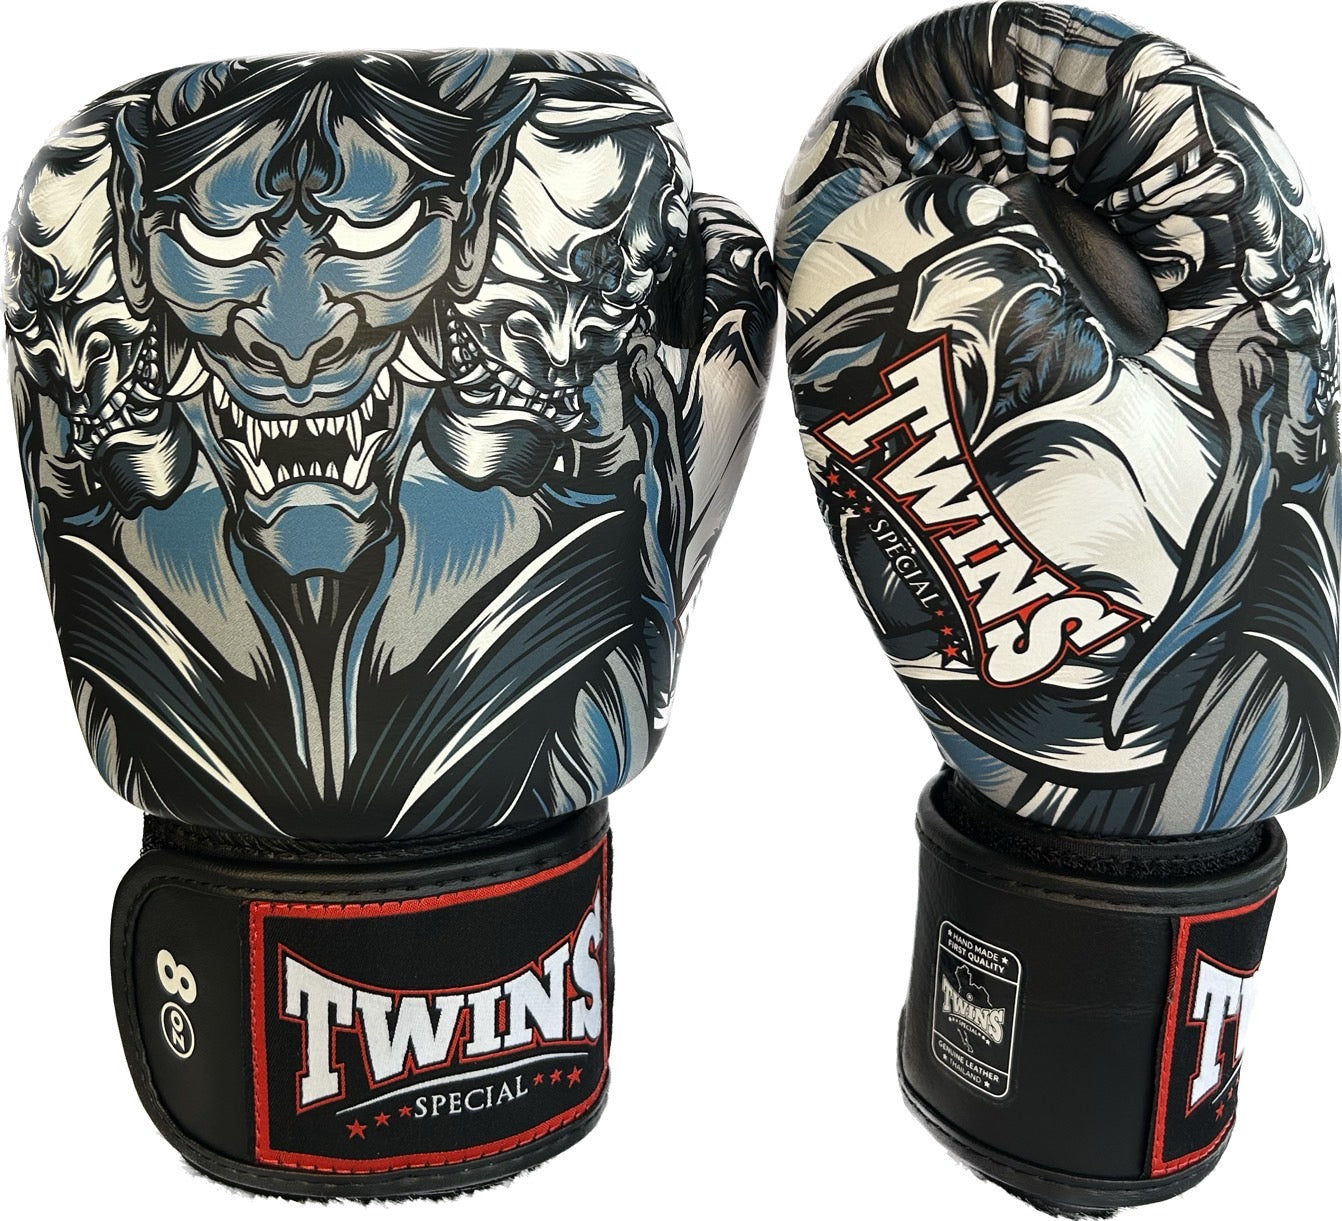 Twins Special Boxing Gloves Fbgvl3-58 Grey Black